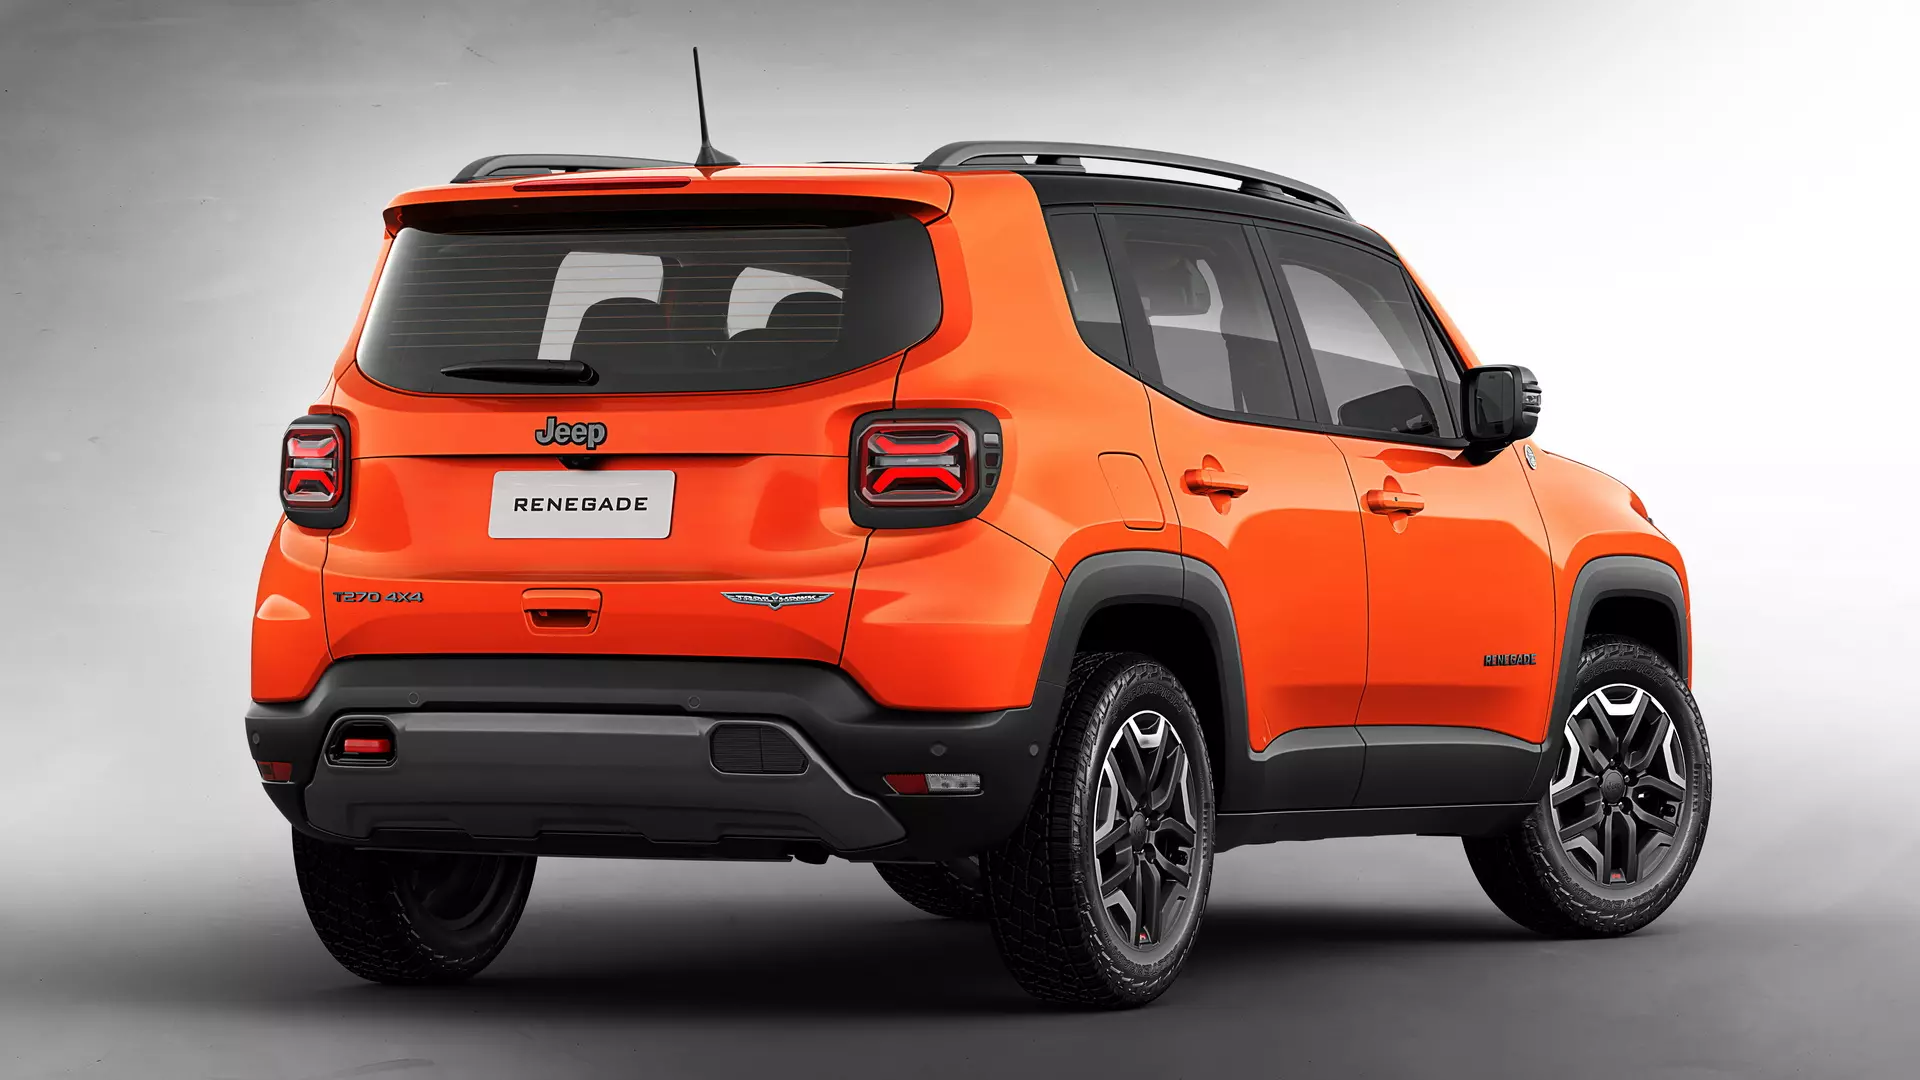 2022 Facelift Jeep Renegade Features Announced, Price List